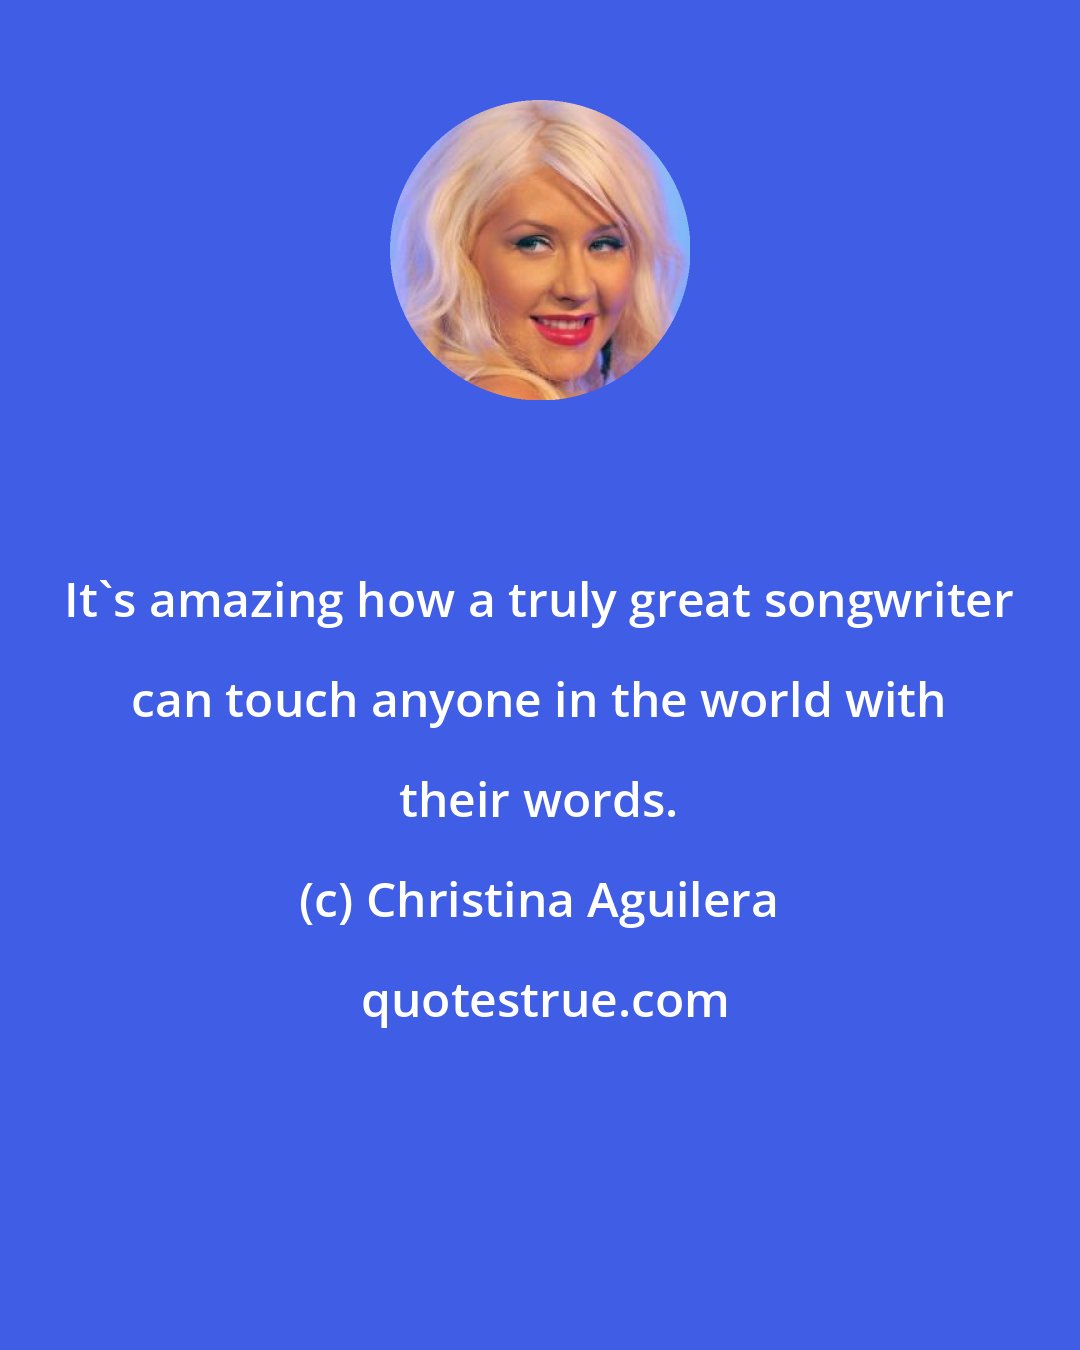 Christina Aguilera: It's amazing how a truly great songwriter can touch anyone in the world with their words.